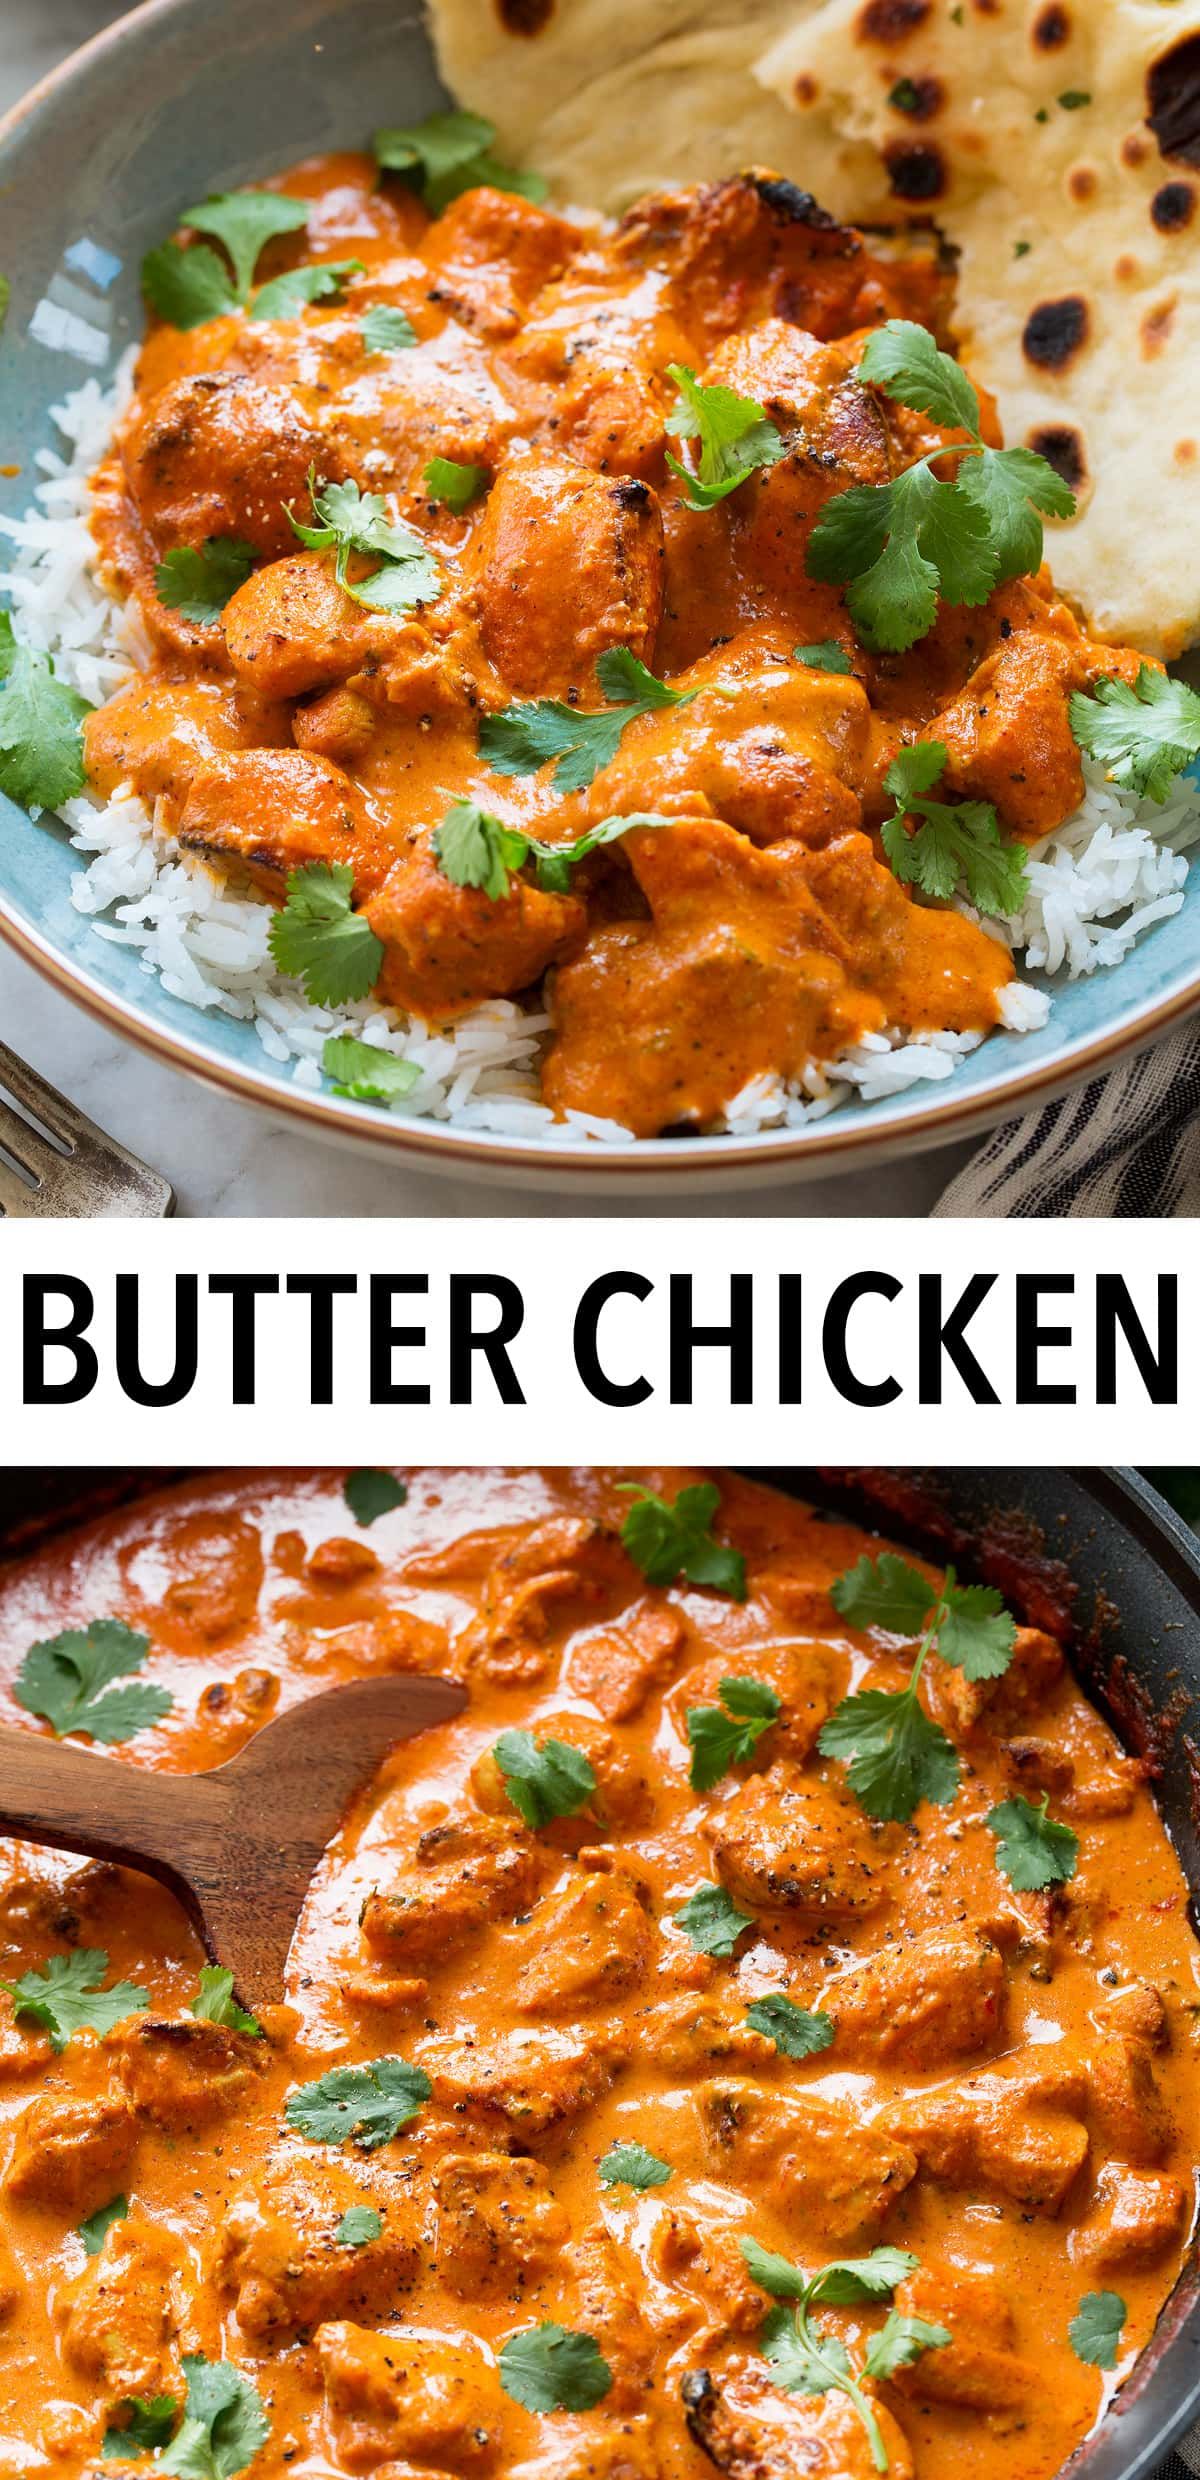 Butter Chicken Recipe - Cooking Classy